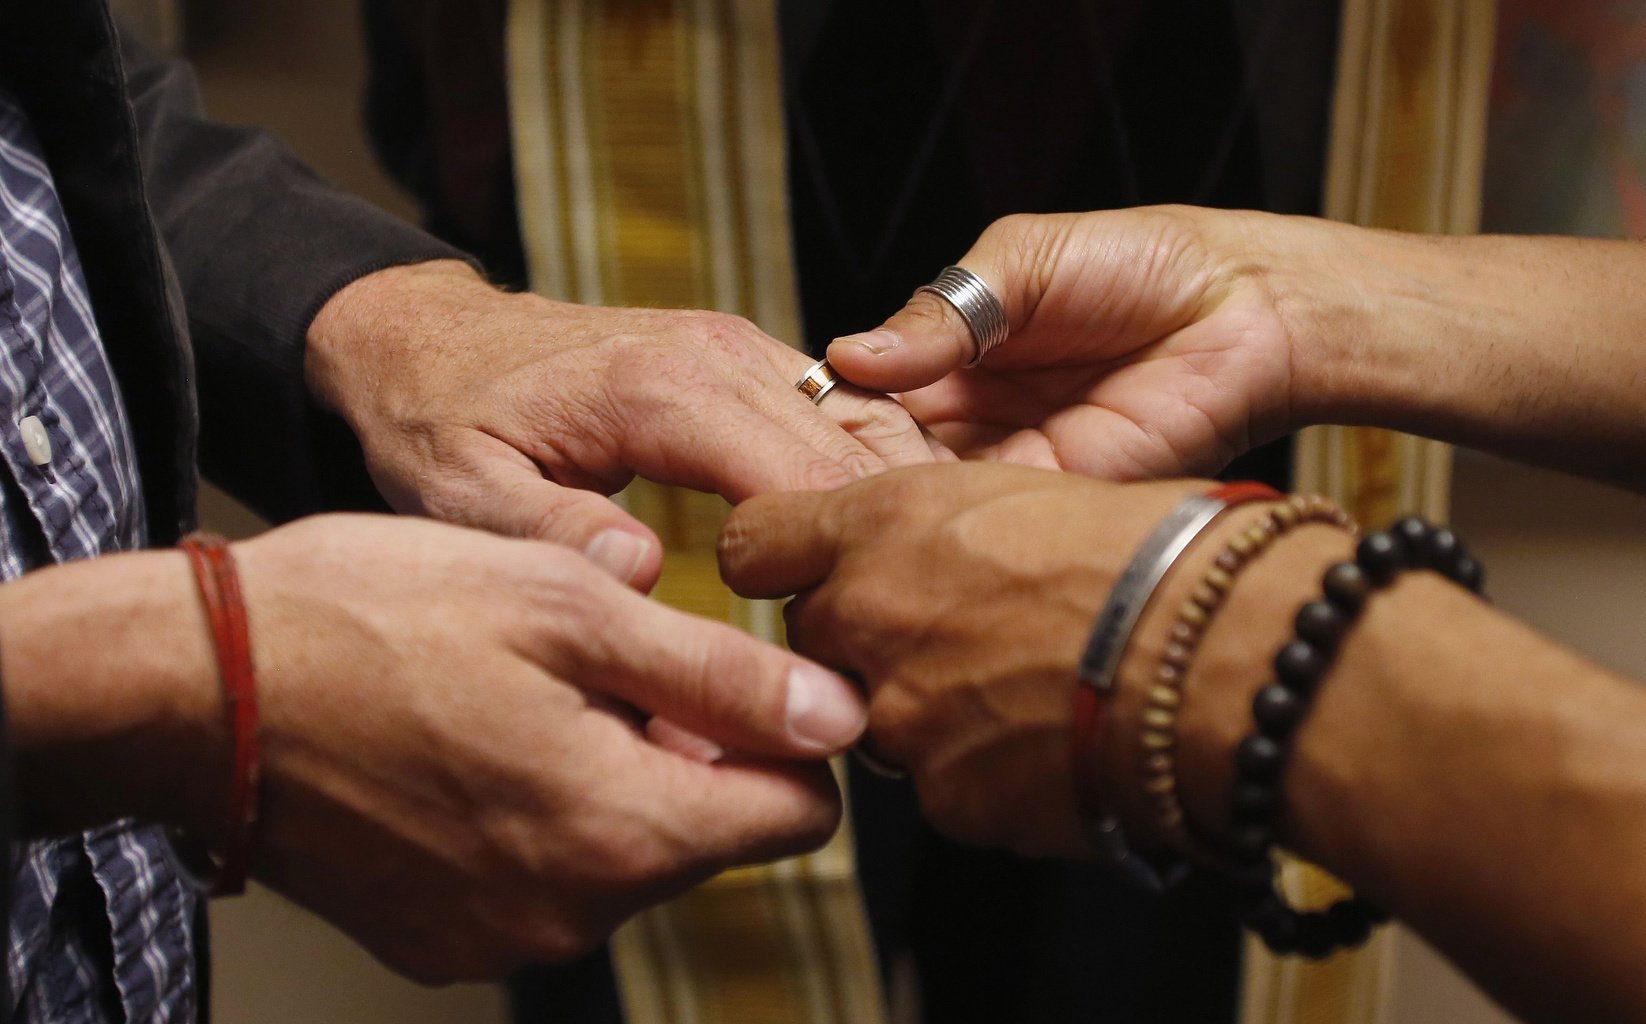 A same-sex couple is pictured in a file photo exchanging rings during a ceremony in Salt Lake City. Pope Francis has indicated an openness to considering with pastoral prudence the subject of blessing same-sex couples, so long as it's clear this is not a sacramental union akin to the sacrament of matrimony. (CNS photo/Jim Urquhar, Reuters)